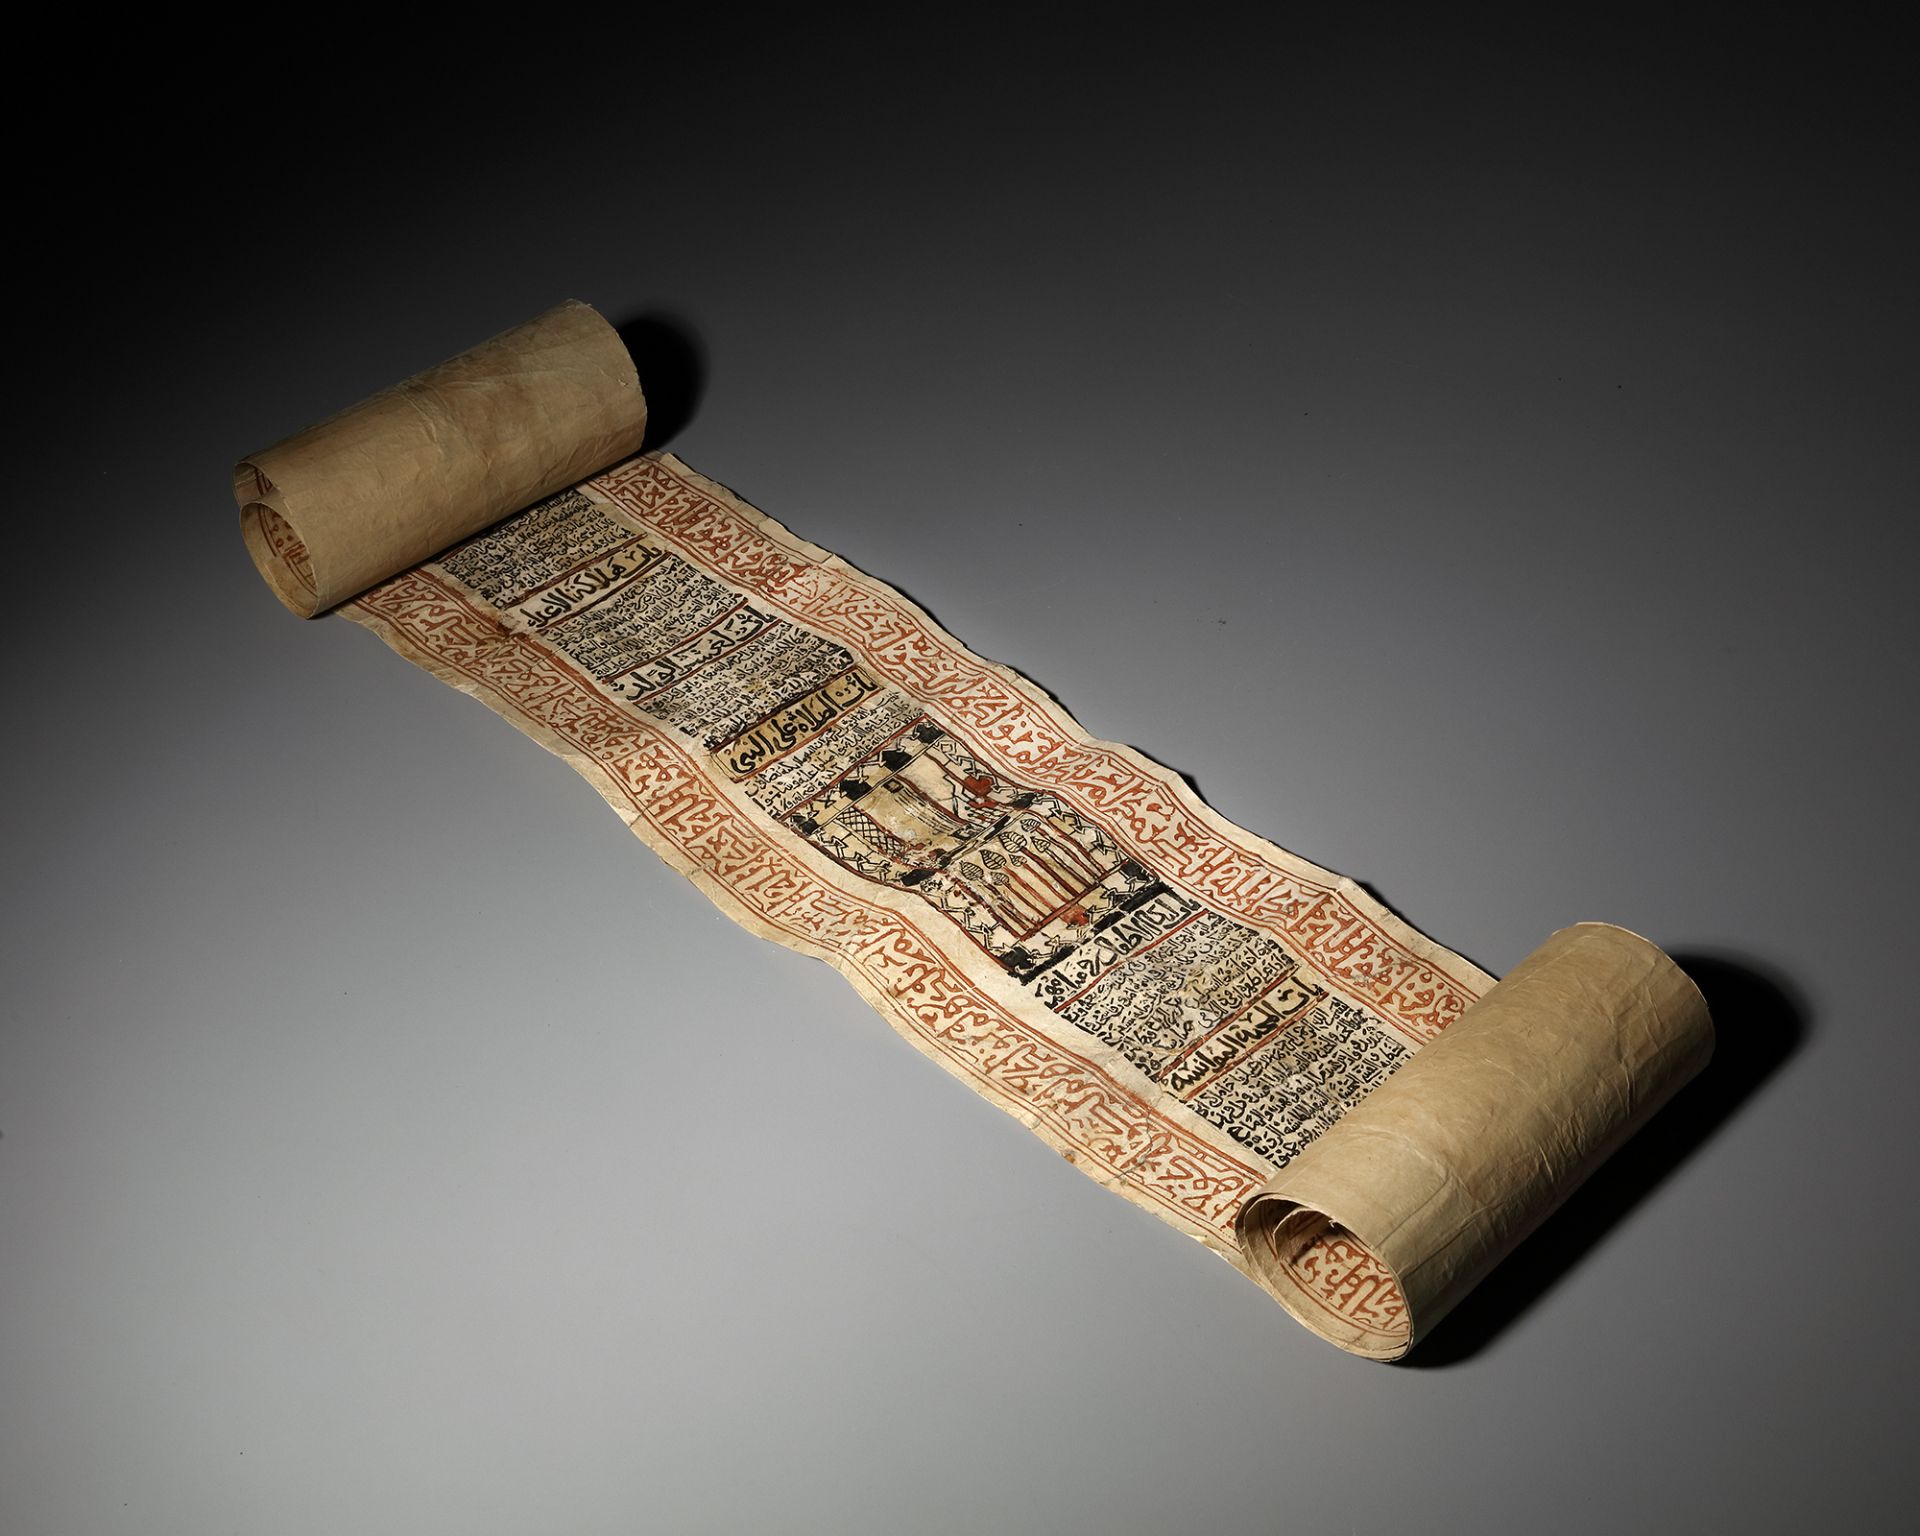 A TALISMANIC SCROLL, ANDALUSIA, 11TH-12TH CENTURY